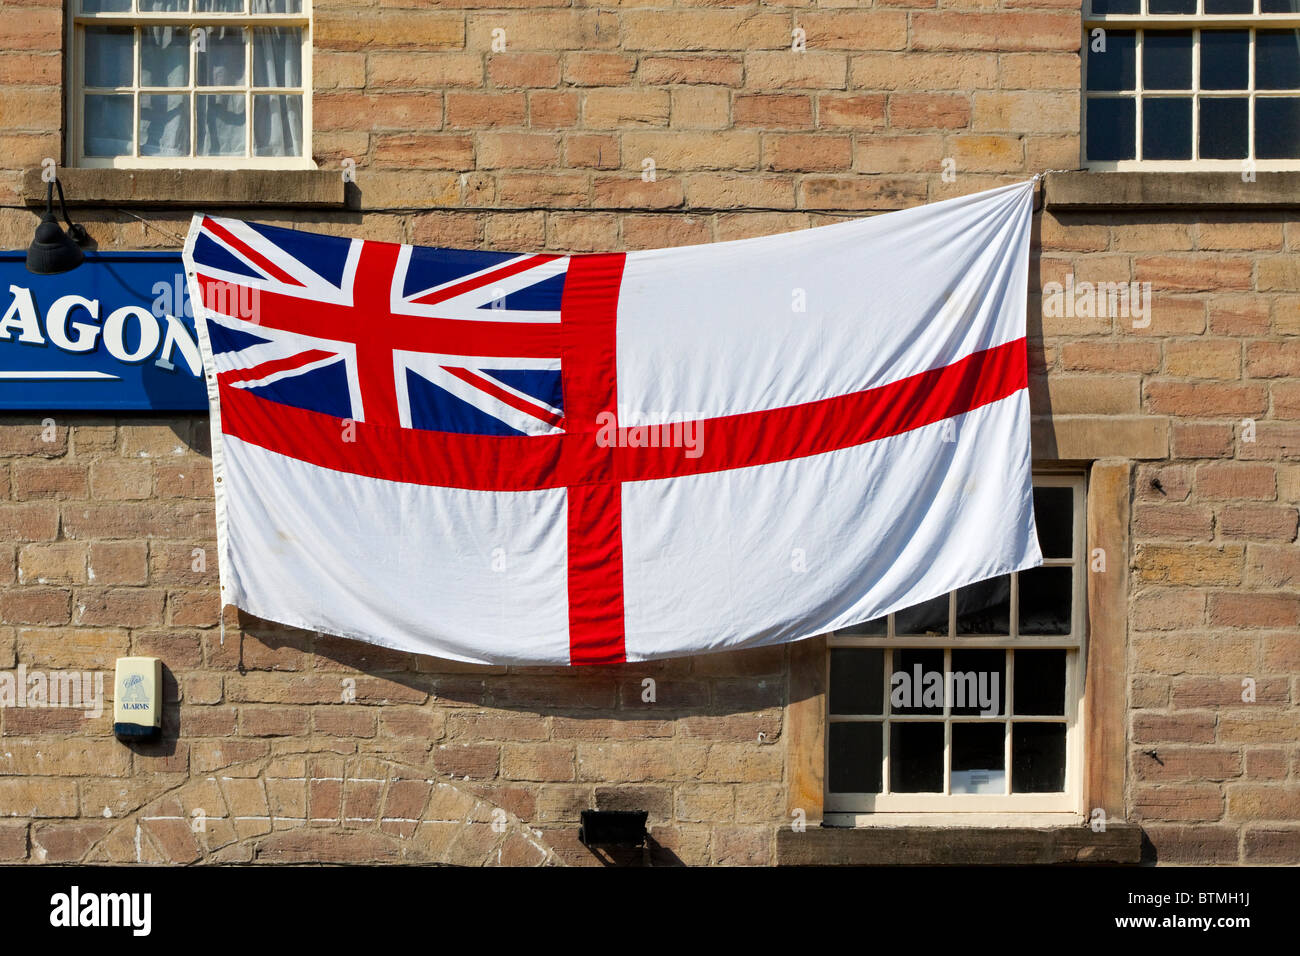 White Ensign or St George's Ensign flag normally flown on British Royal Navy ships or shore establishments seen her outside pub Stock Photo